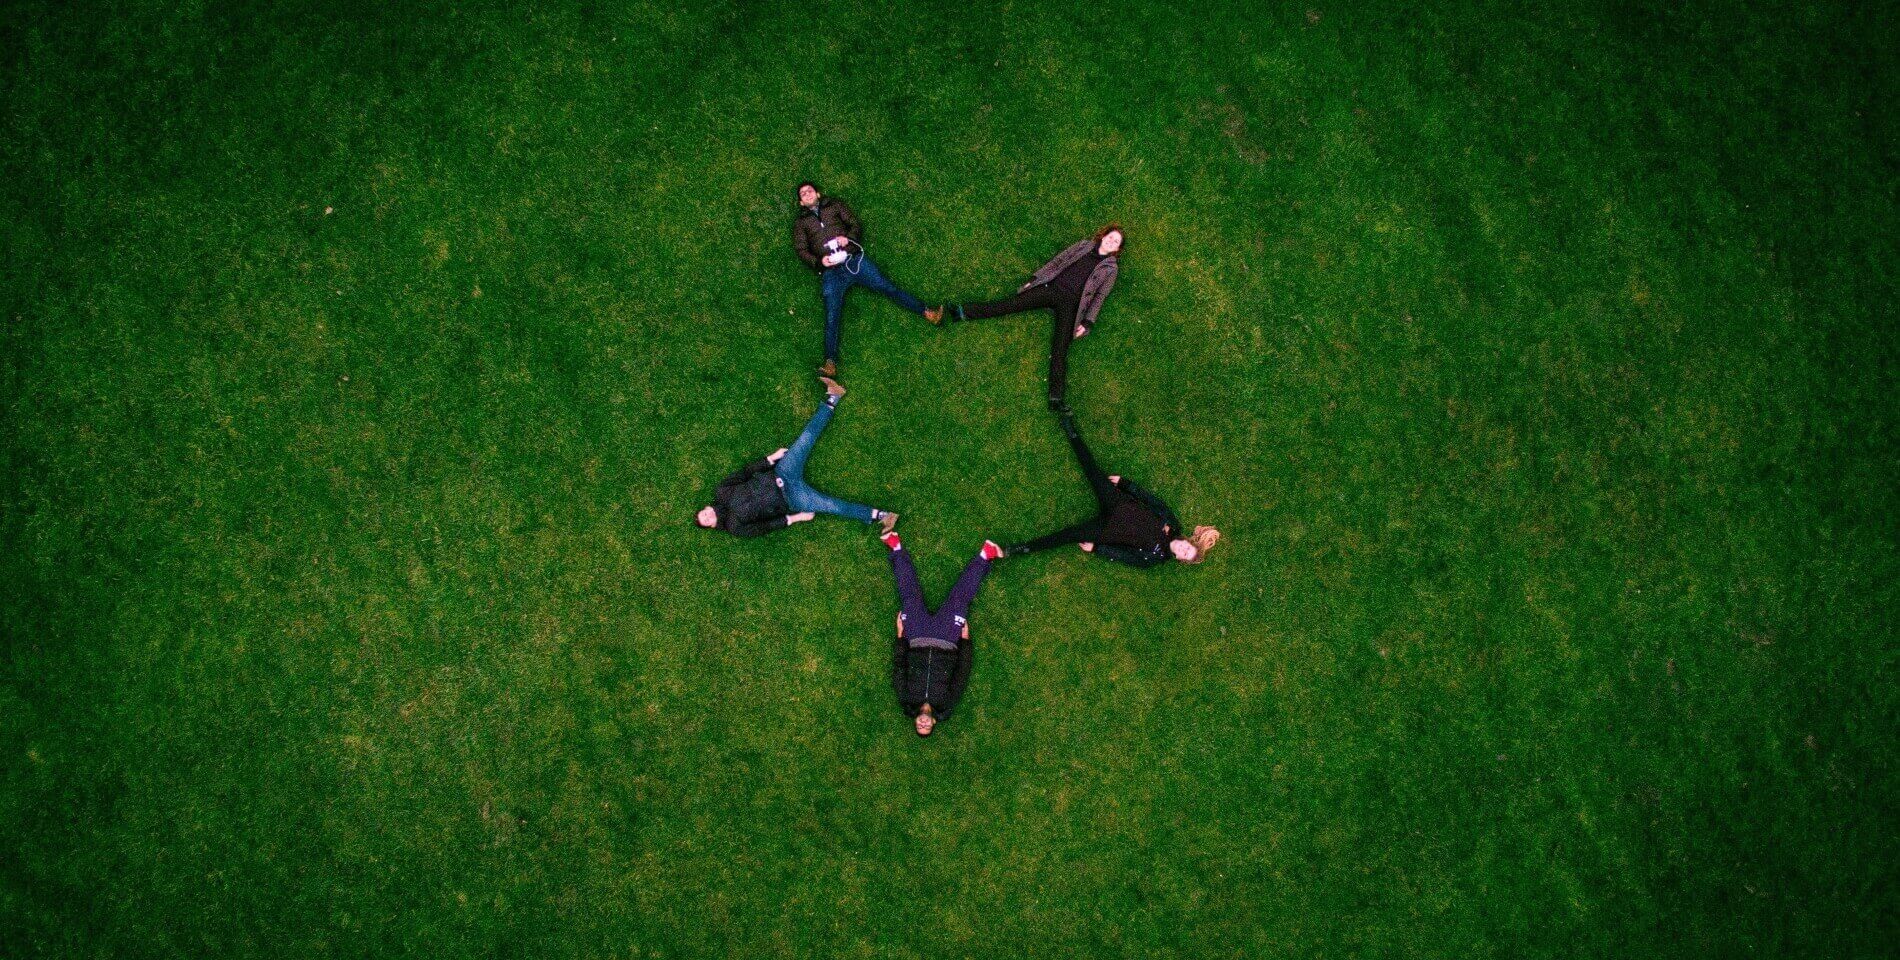 Aerial view of five people laying on green grass area joining their feet to form a star shape